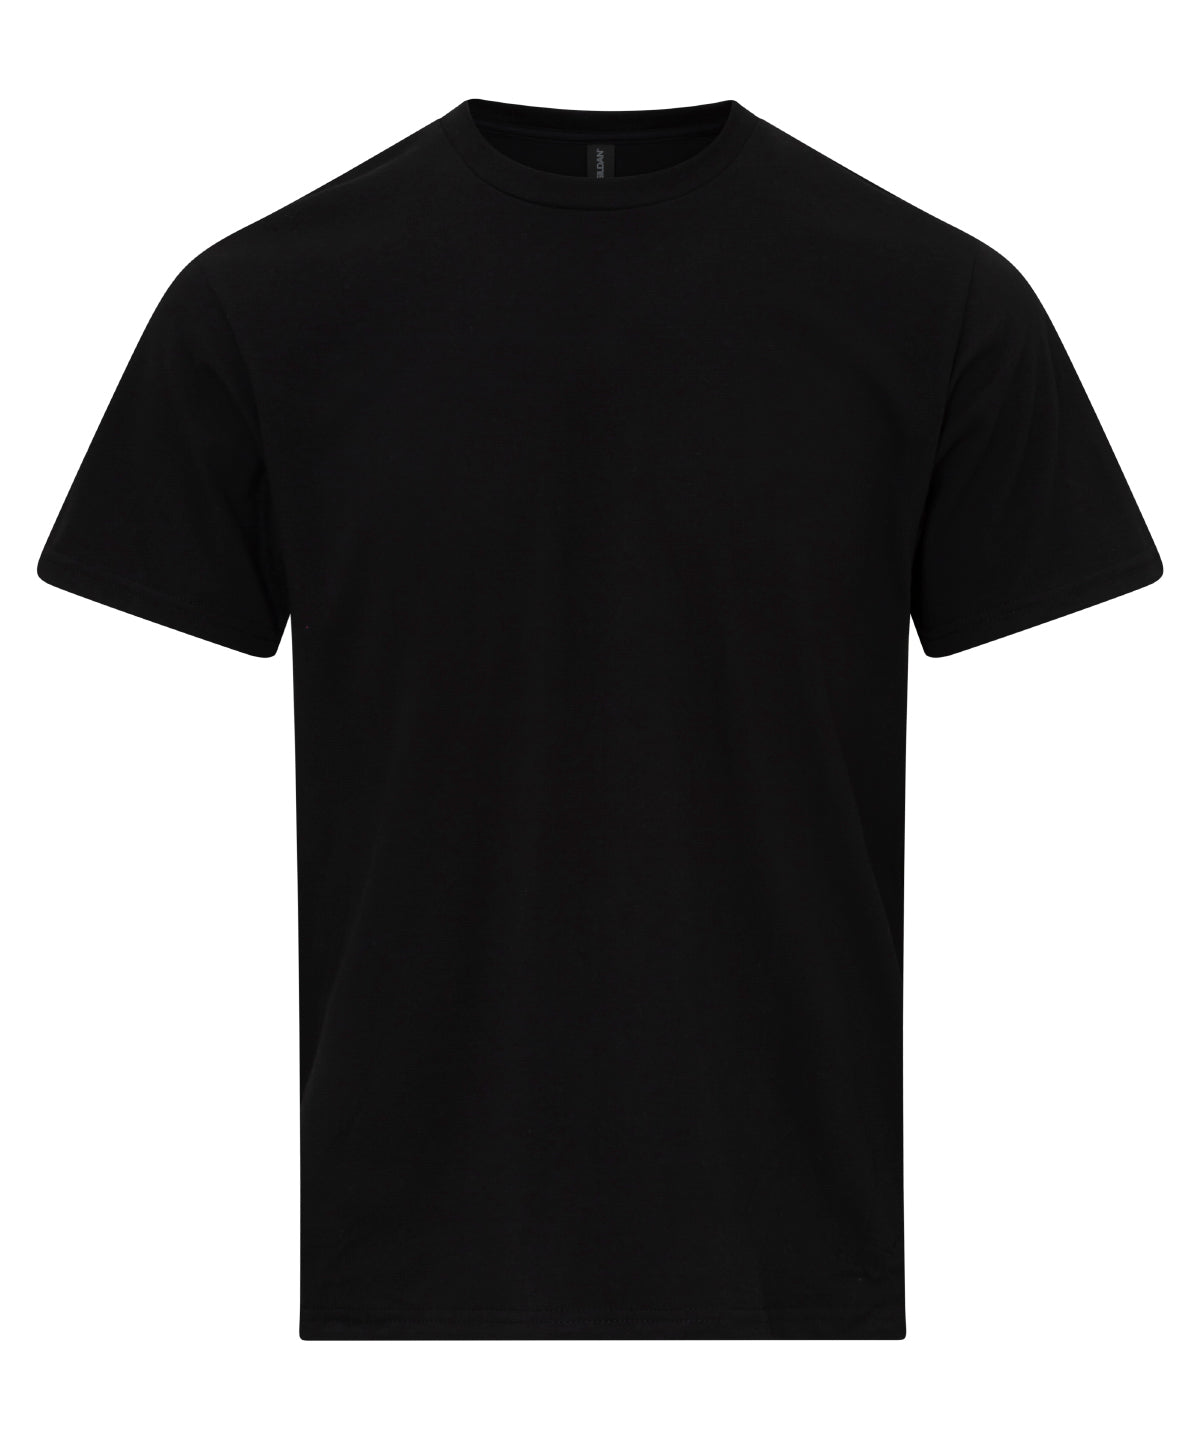 Softstyle midweight adult t-shirt | Pitch Black